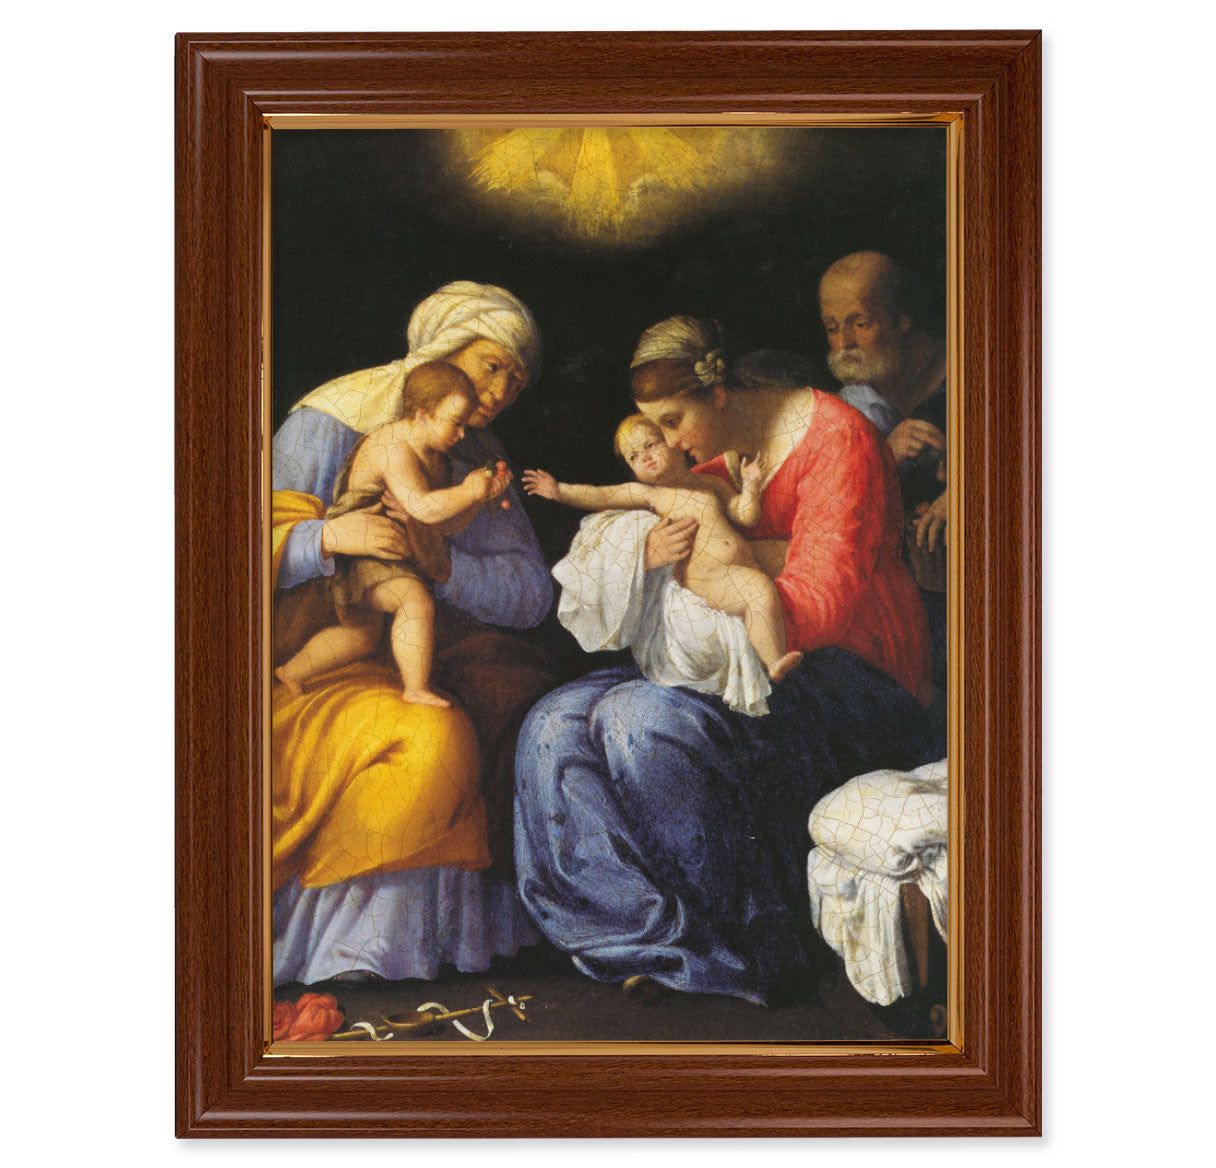 St. Anne, John the Baptist and the Holy Family Picture Framed Wall Art Decor Extra Large, Traditional Dark Walnut Finished Frame with Thin Gold Lip